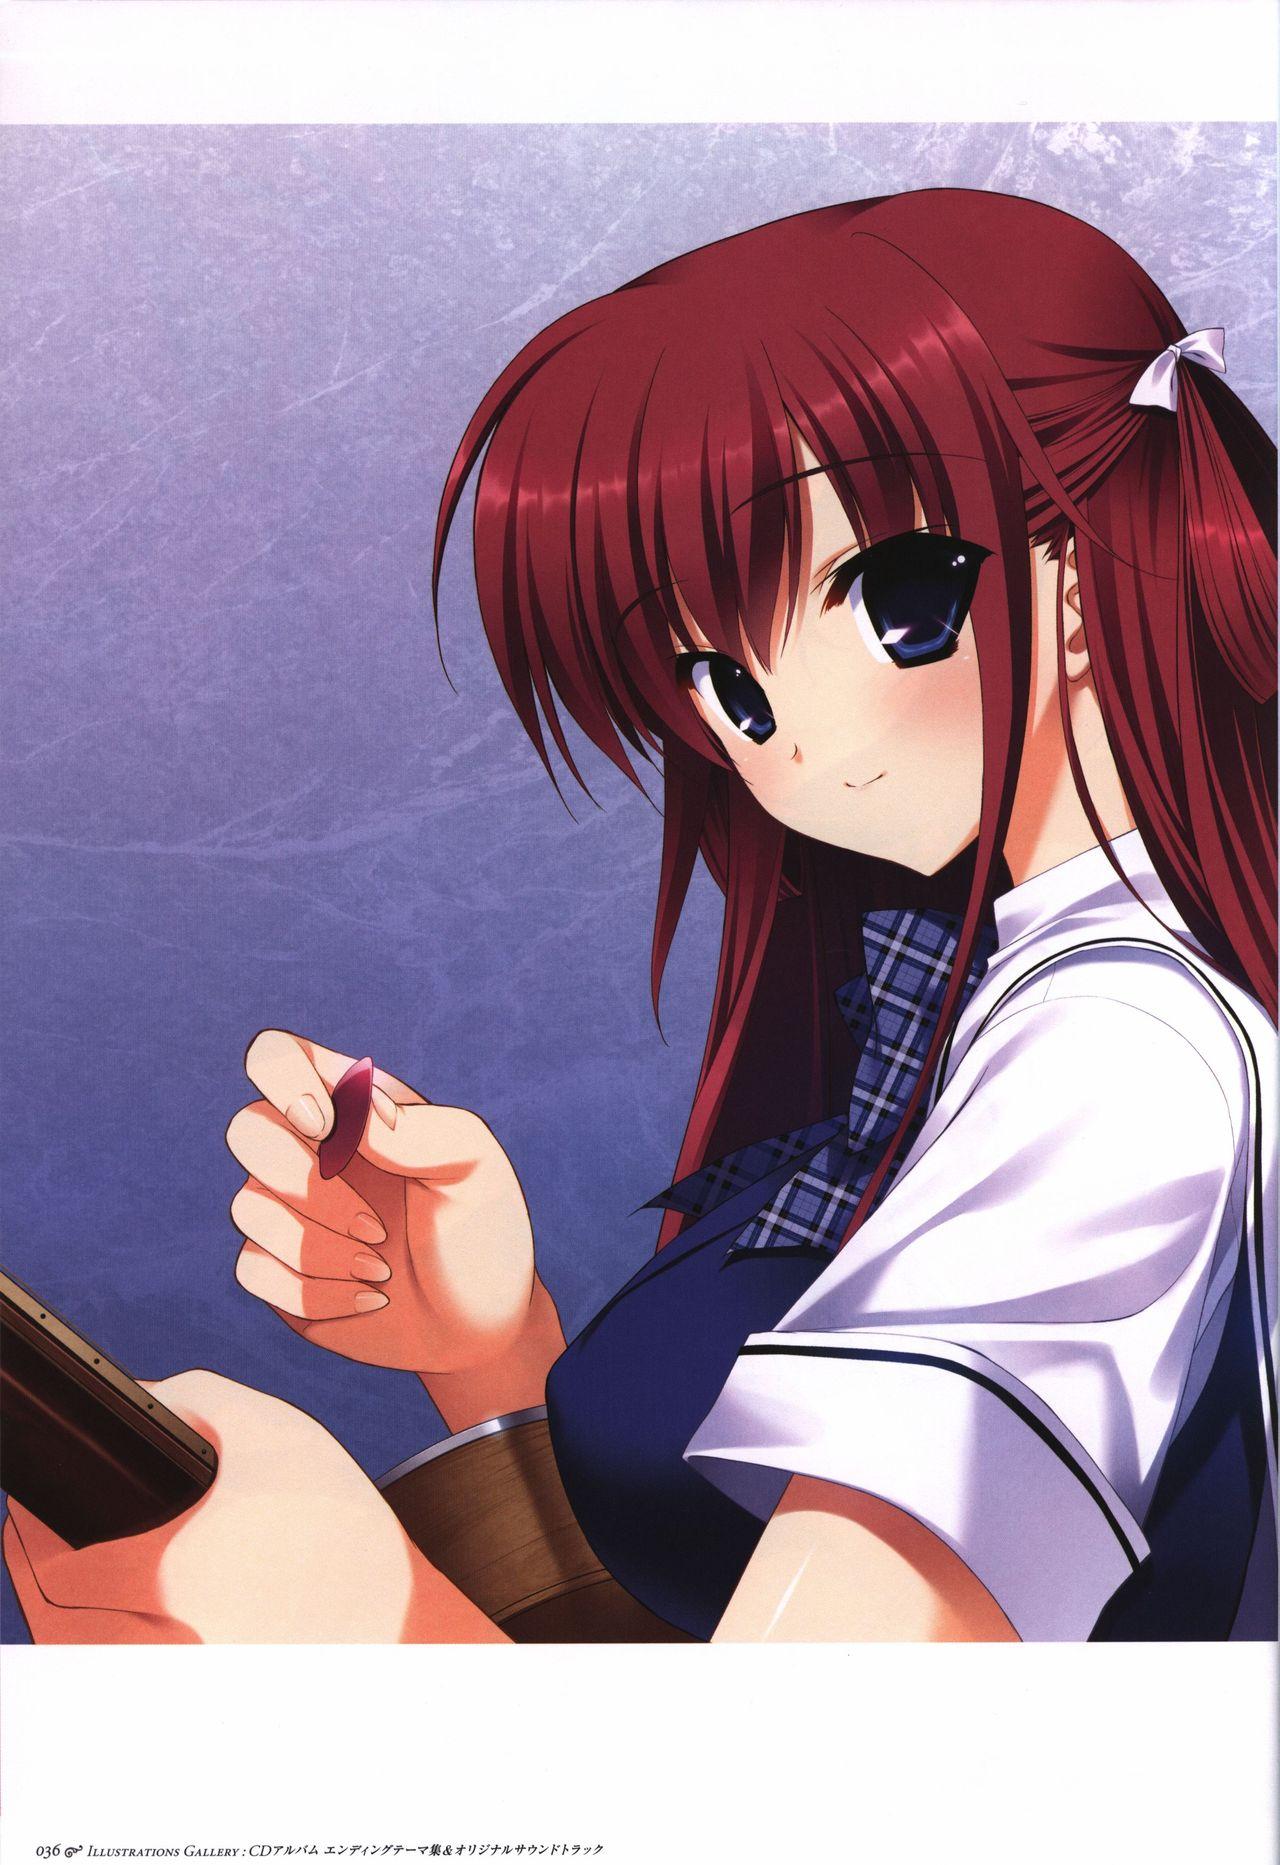 The Fruit of Grisaia Visual FanBook 36